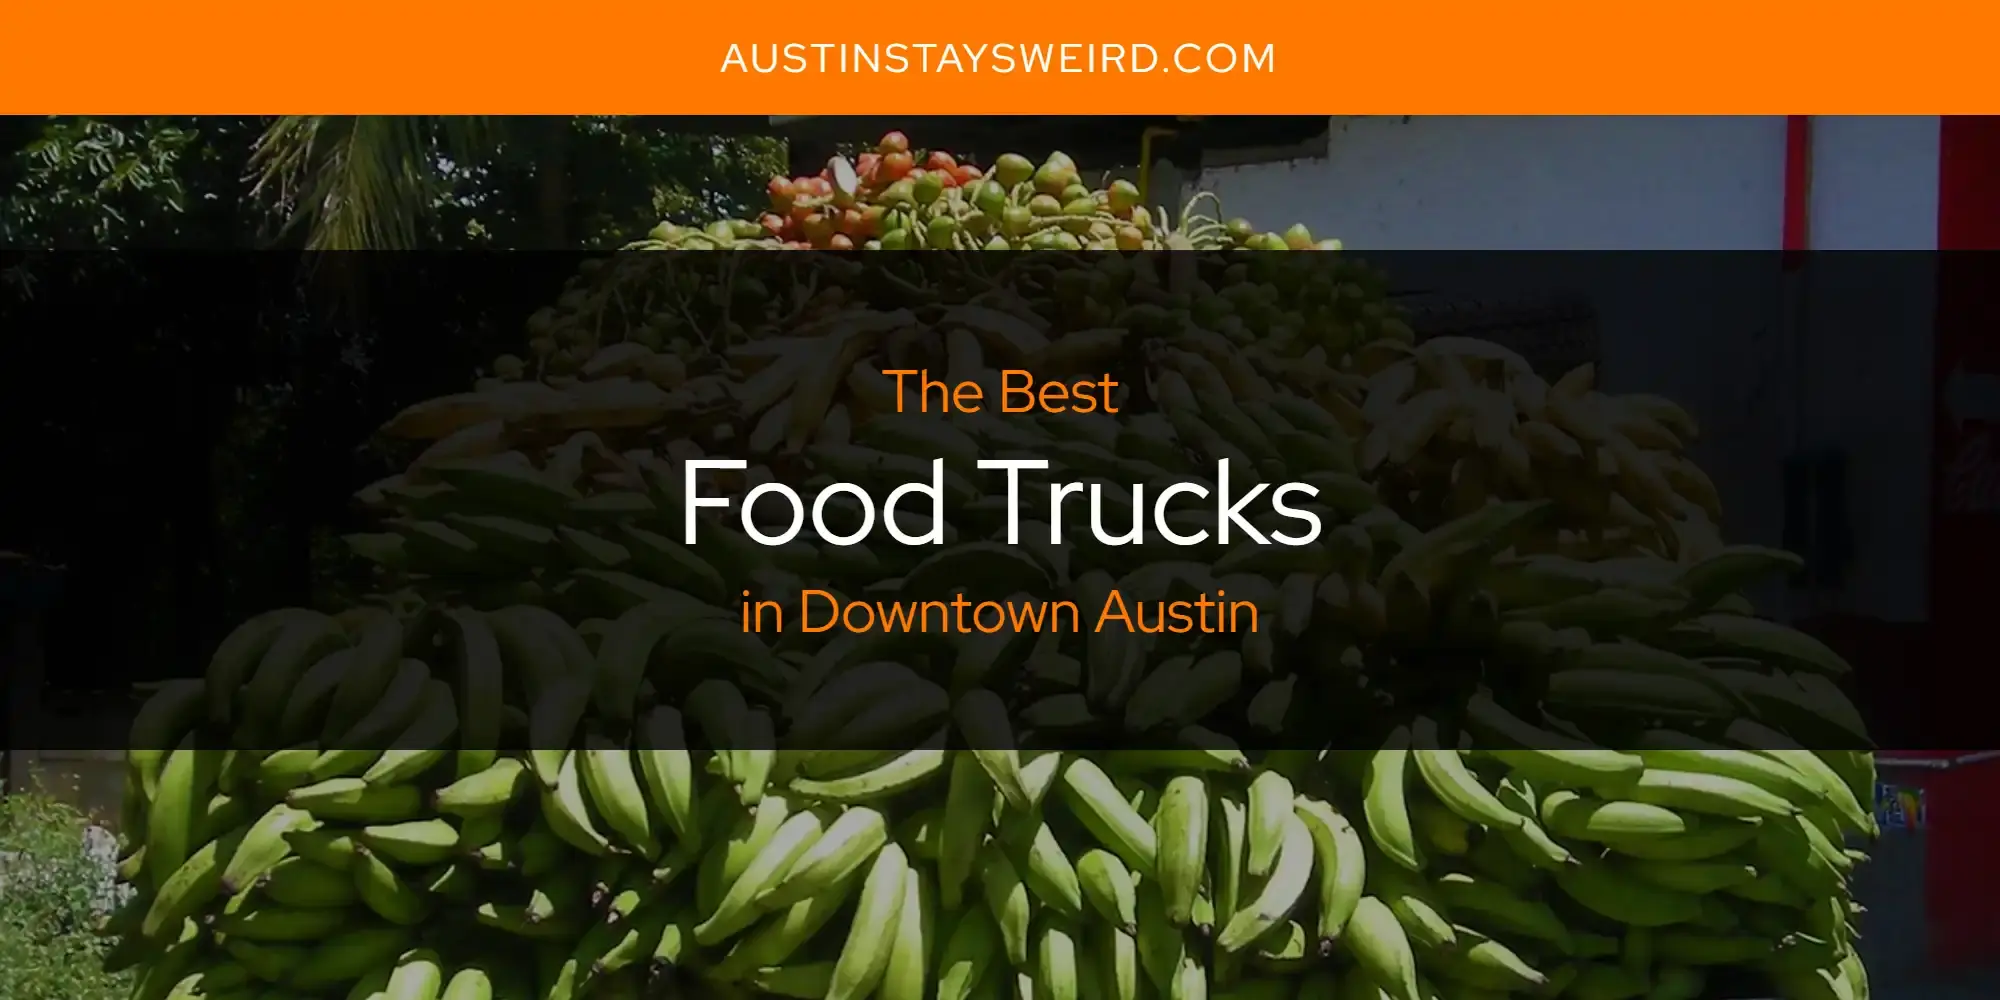 Best Food Trucks in Downtown Austin? Here's the Top 8